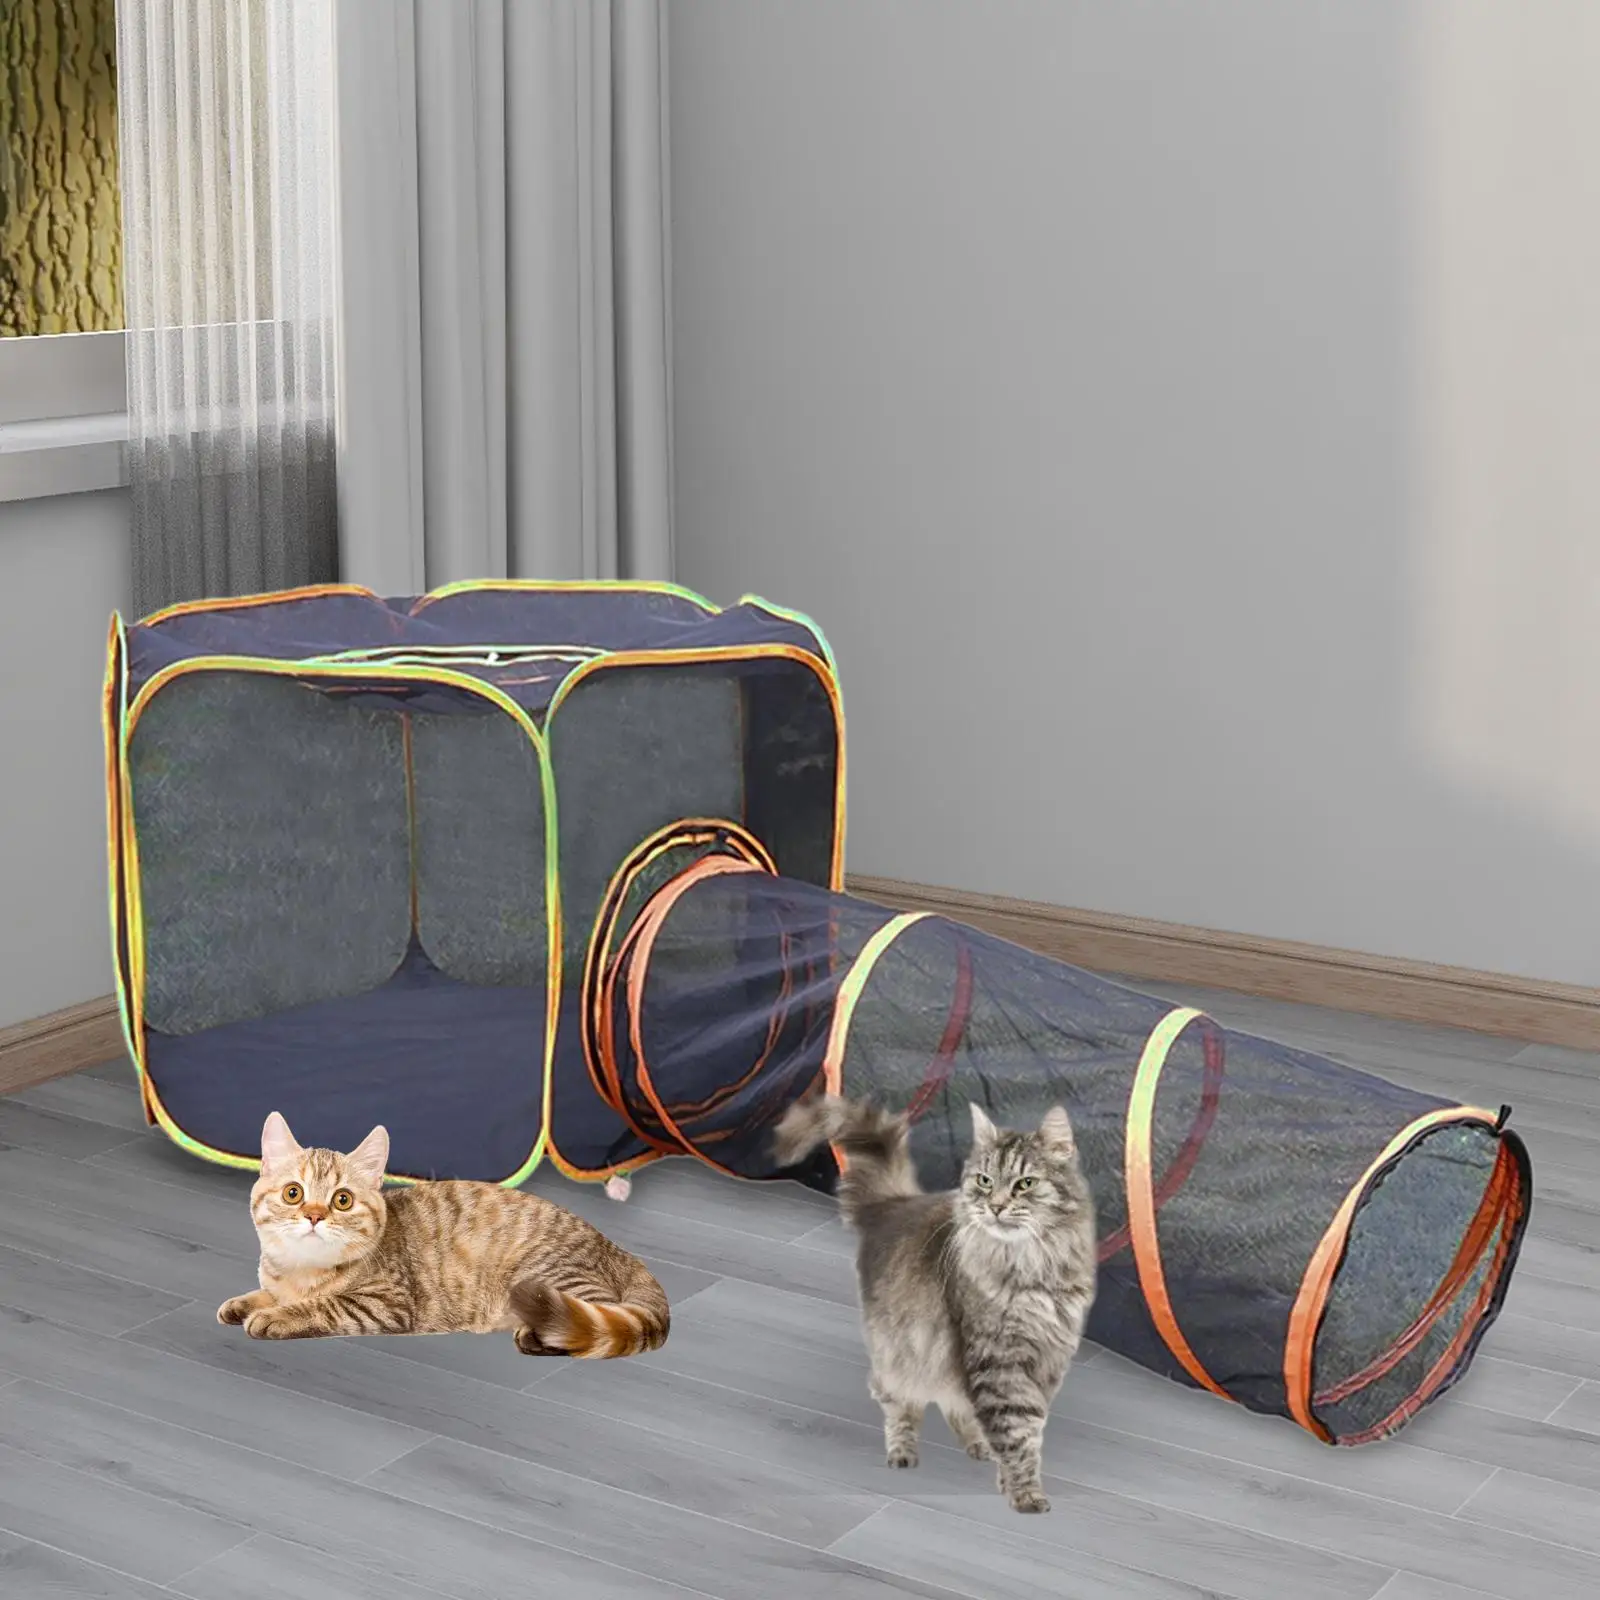 Playhouse Cats Cube Portable Outdoor Indoor Playground Cat Enclosures Cat Tent Tunnel Pet Playpen for Rest Dog Ferrets Small Pet